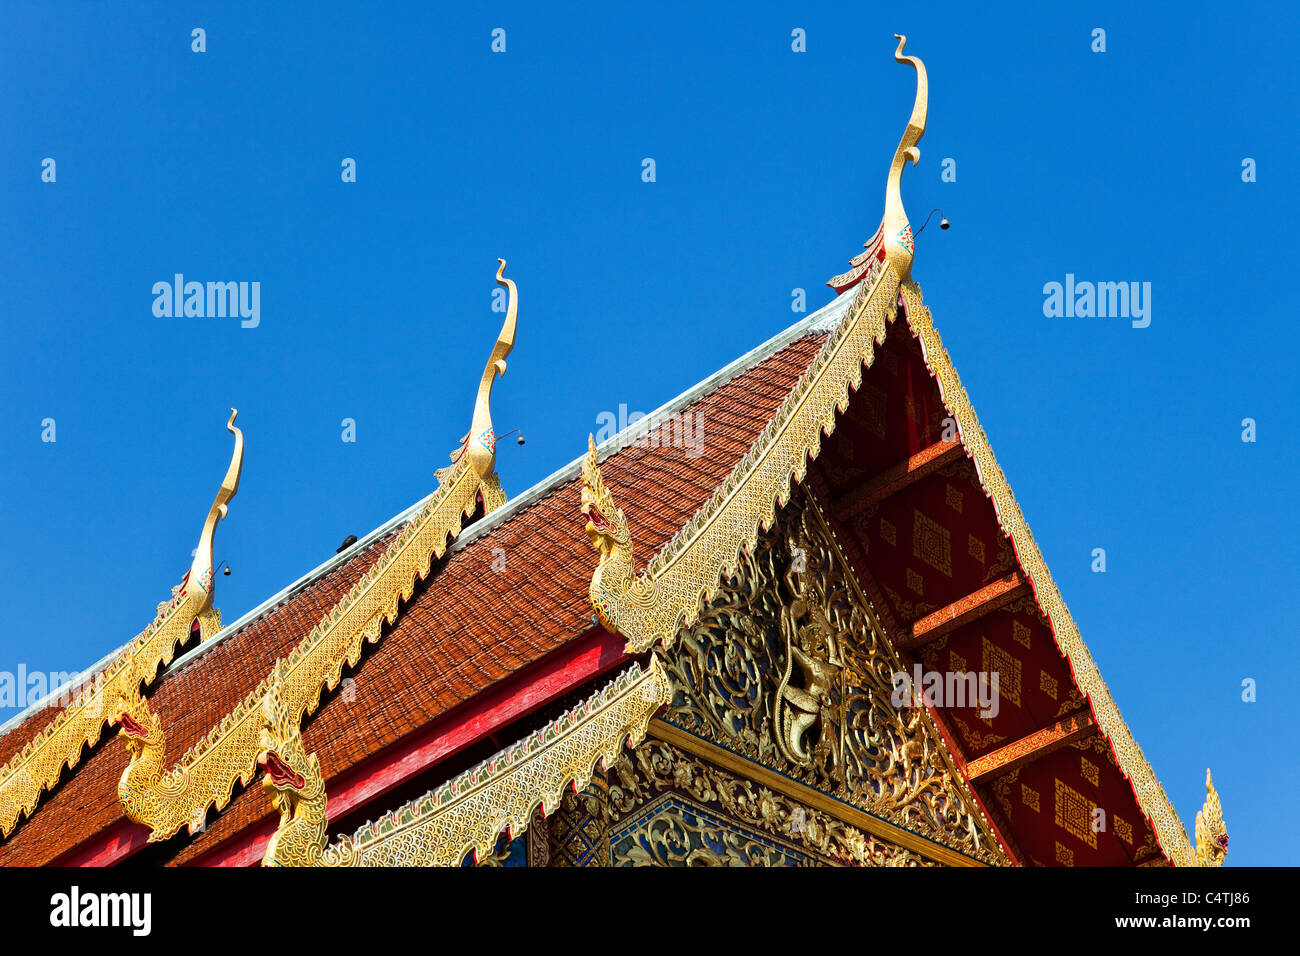 Wat Phra Singh Temple in Chiang Mai, Thailand Stock Photo